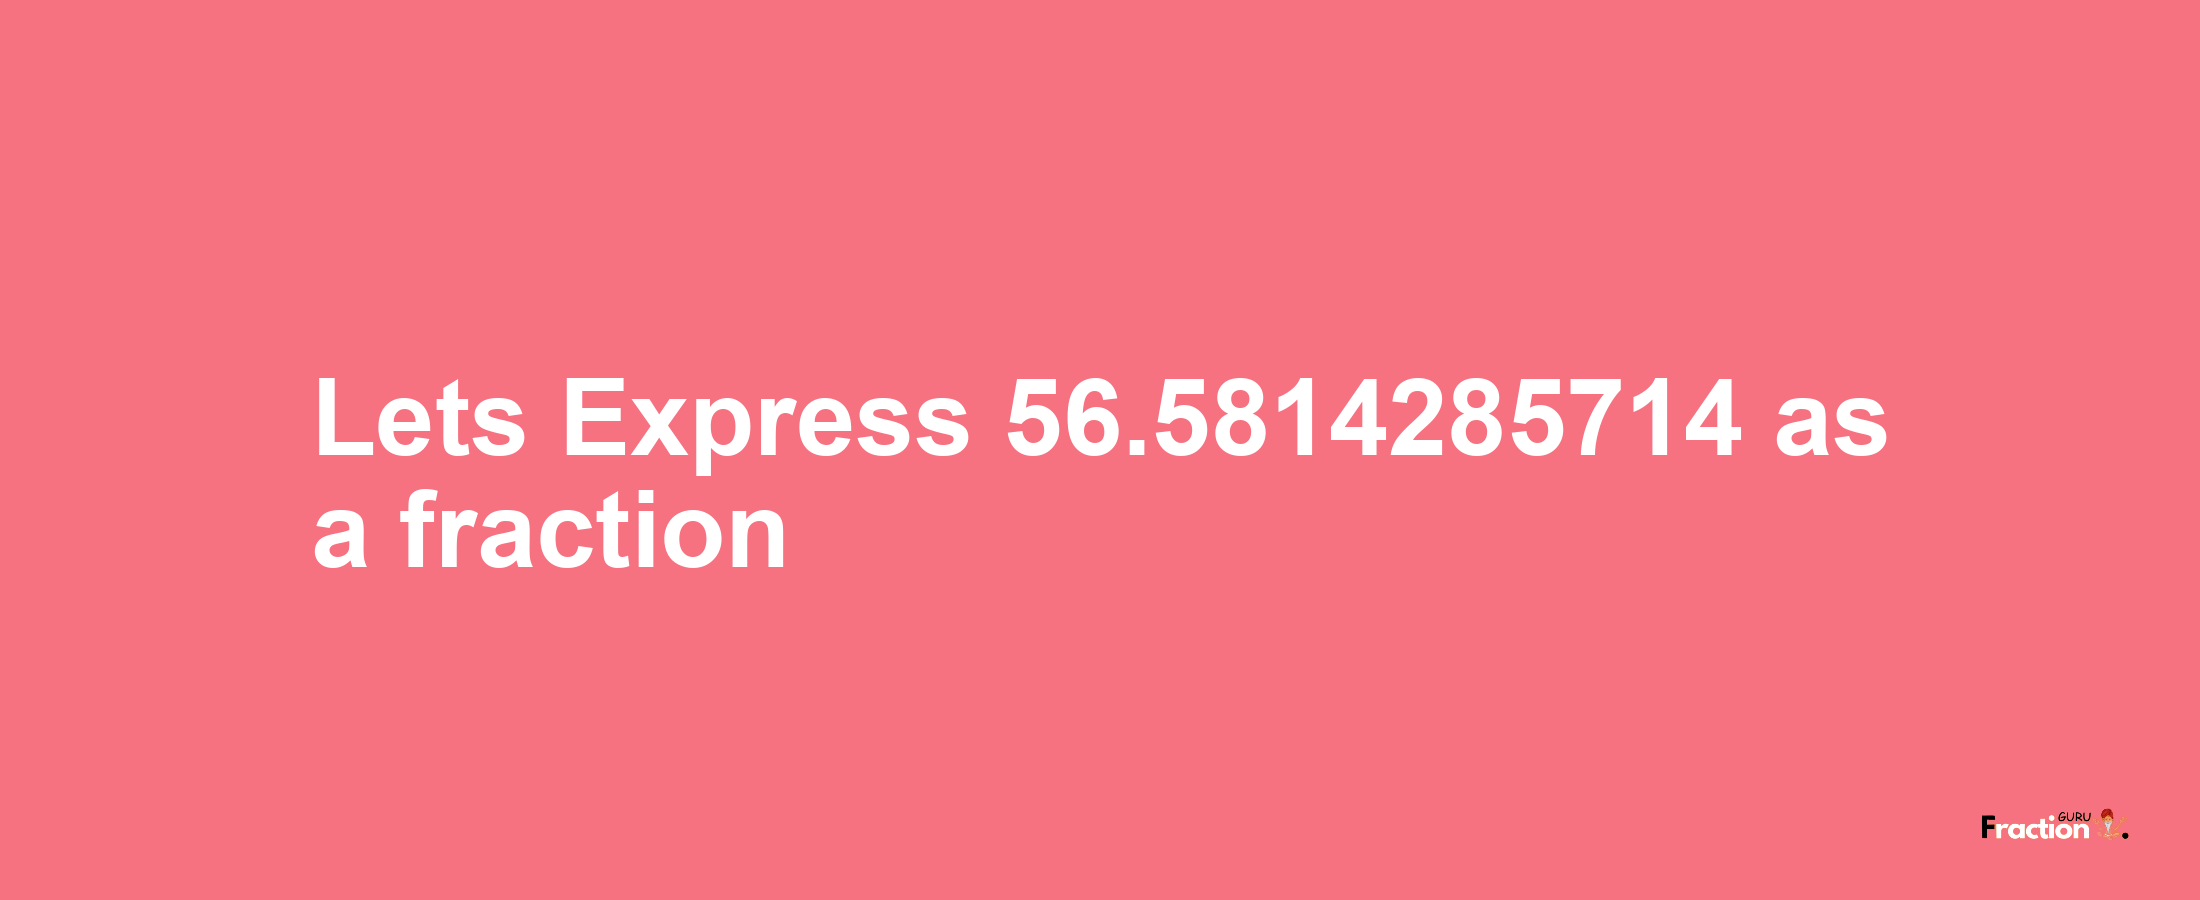 Lets Express 56.5814285714 as afraction